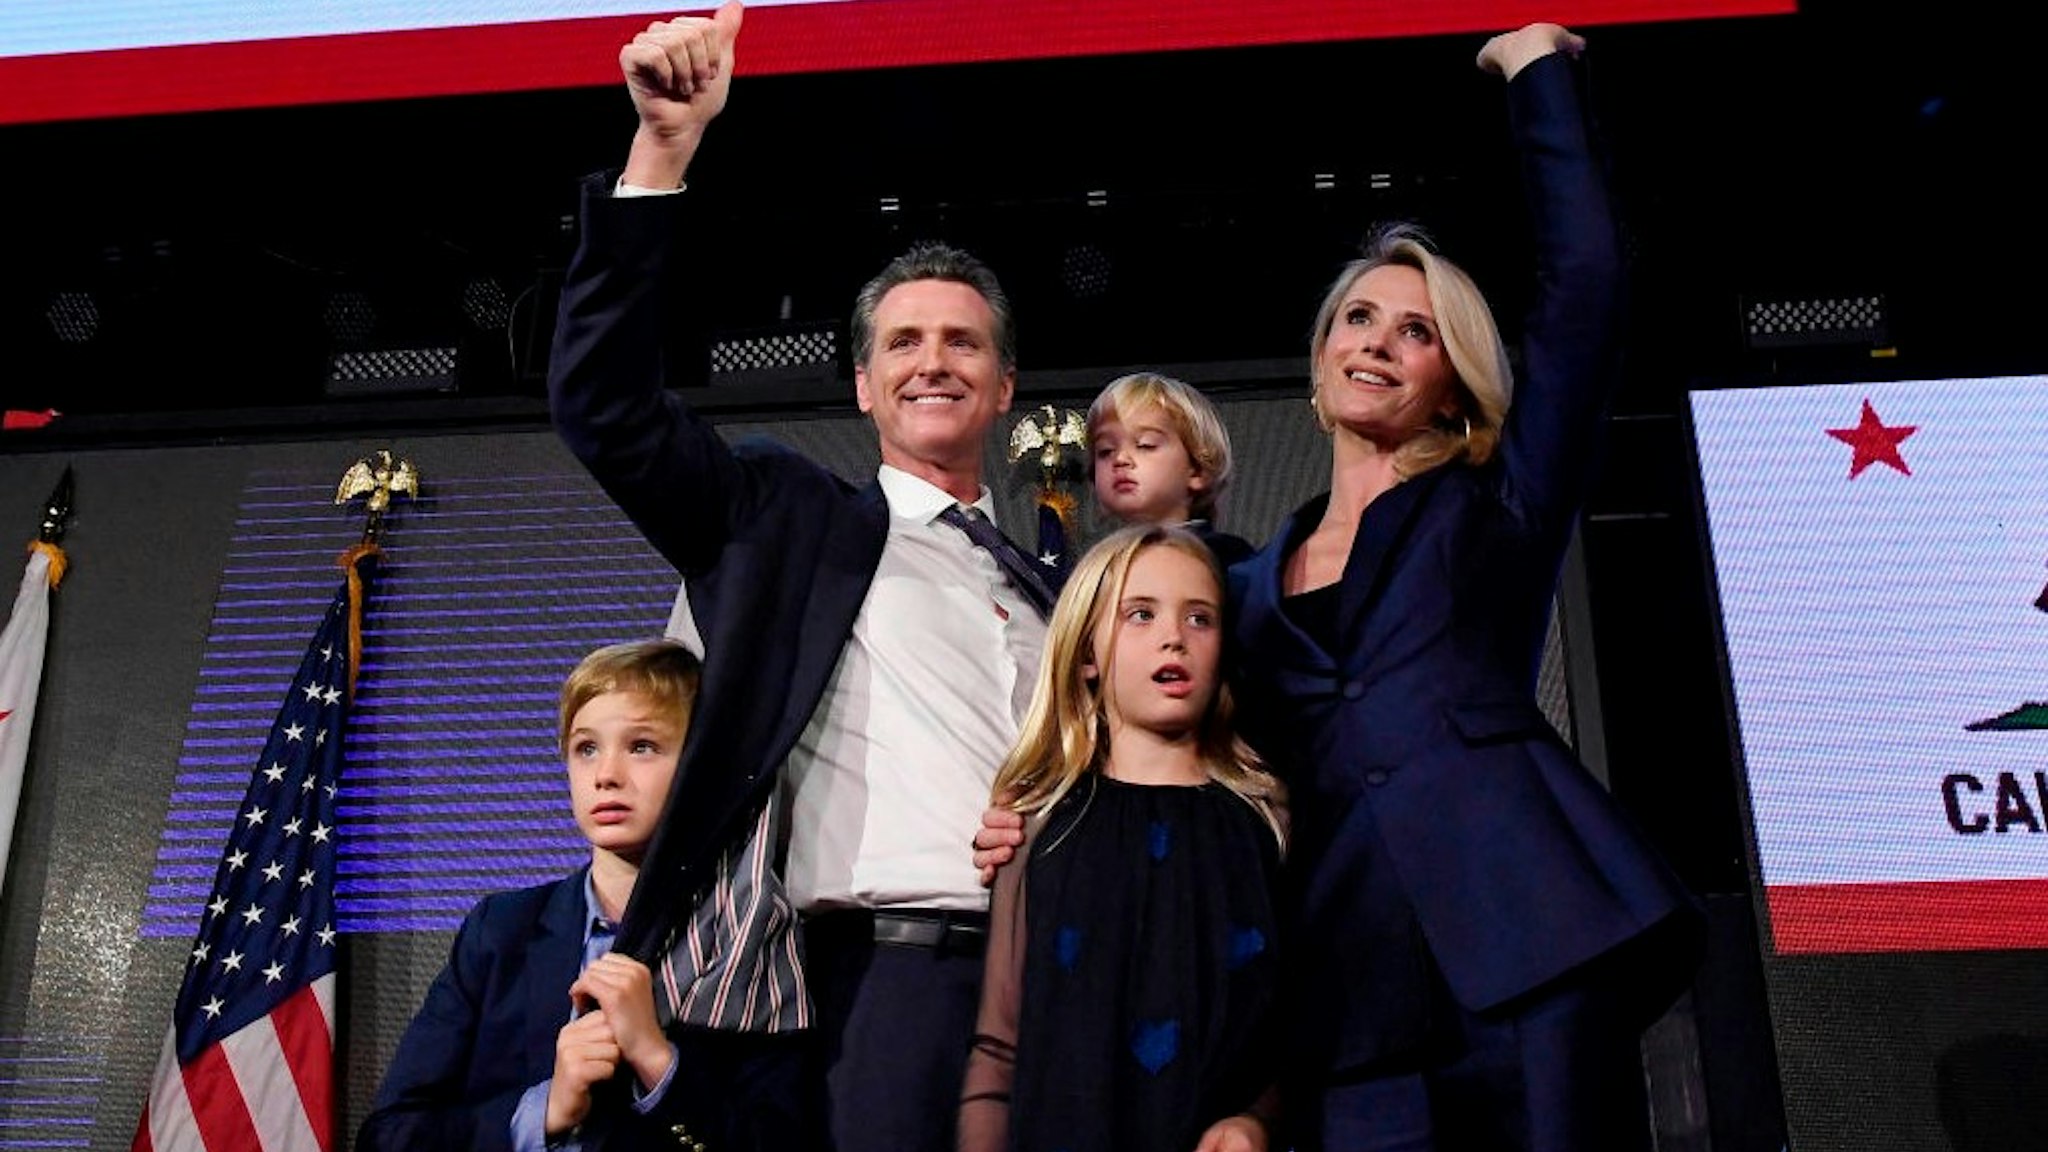 LOS ANGELES, CA - NOVEMBER 06: Democratic gubernatorial candidate Gavin Newsom holding his son Dutch, 2, and standing with his son Hunter, 7, wife Jennifer Siebel Newsom and daughter Montana, 9, as he waves to supporters during election night event on November 6, 2018 in Los Angeles, California. Newsom defeated Republican Gubernatorial candidate John Cox. (Photo by